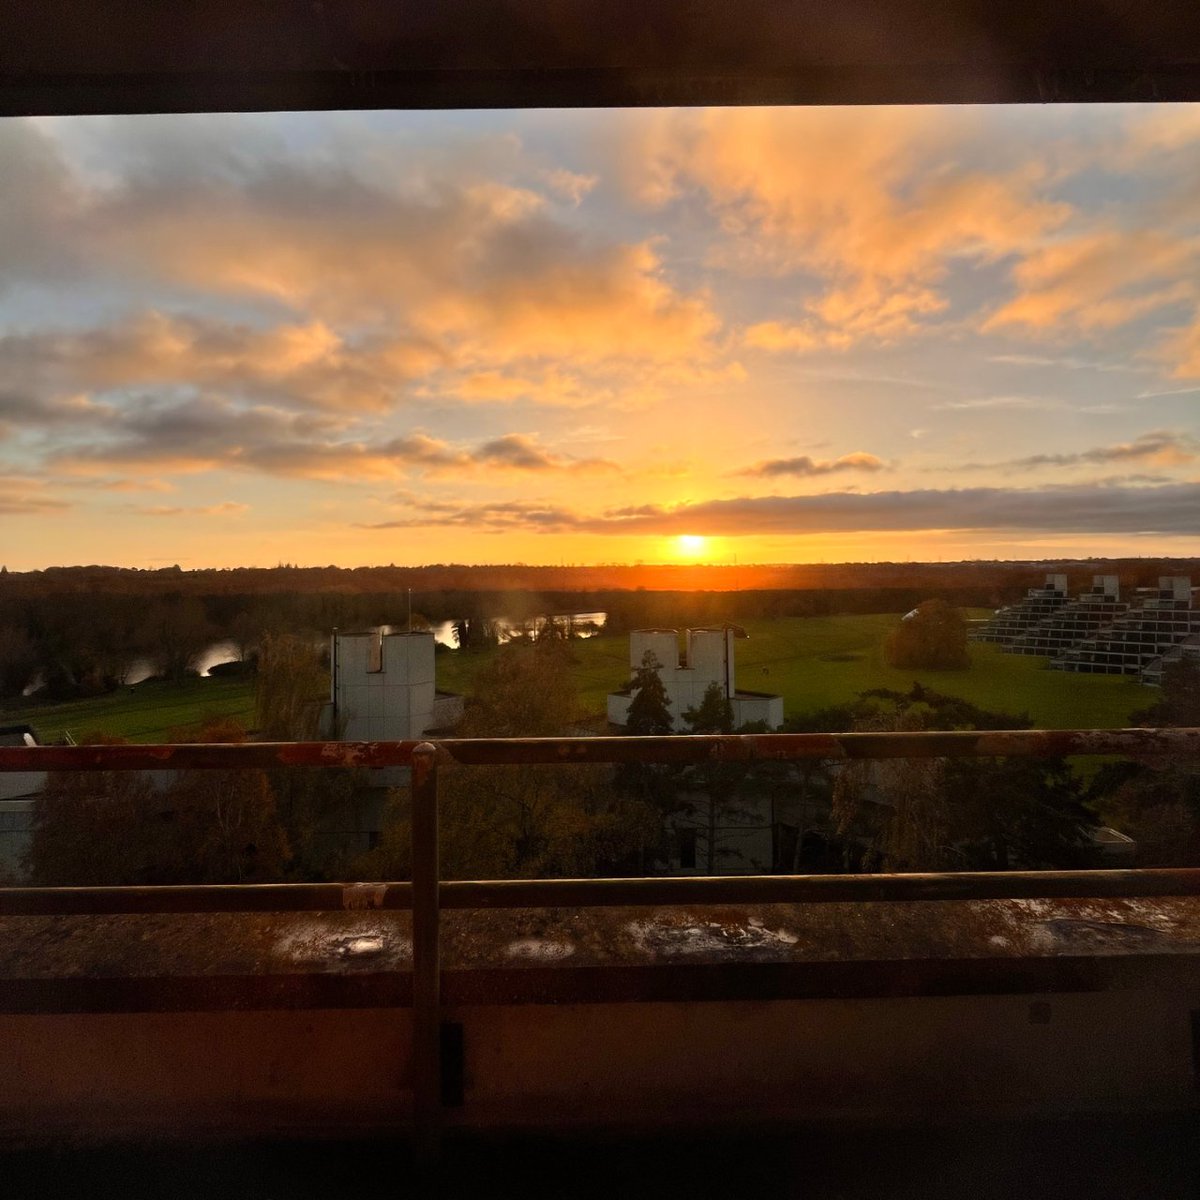 There's nothing quite like a winter sunset on campus 😍 Don't worry if you prefer to stay cosy and study at home. The Library has plenty of resources available online that you can access. Just take a look at the Library webpages on MyUEA or google UEA Digital Library for more.